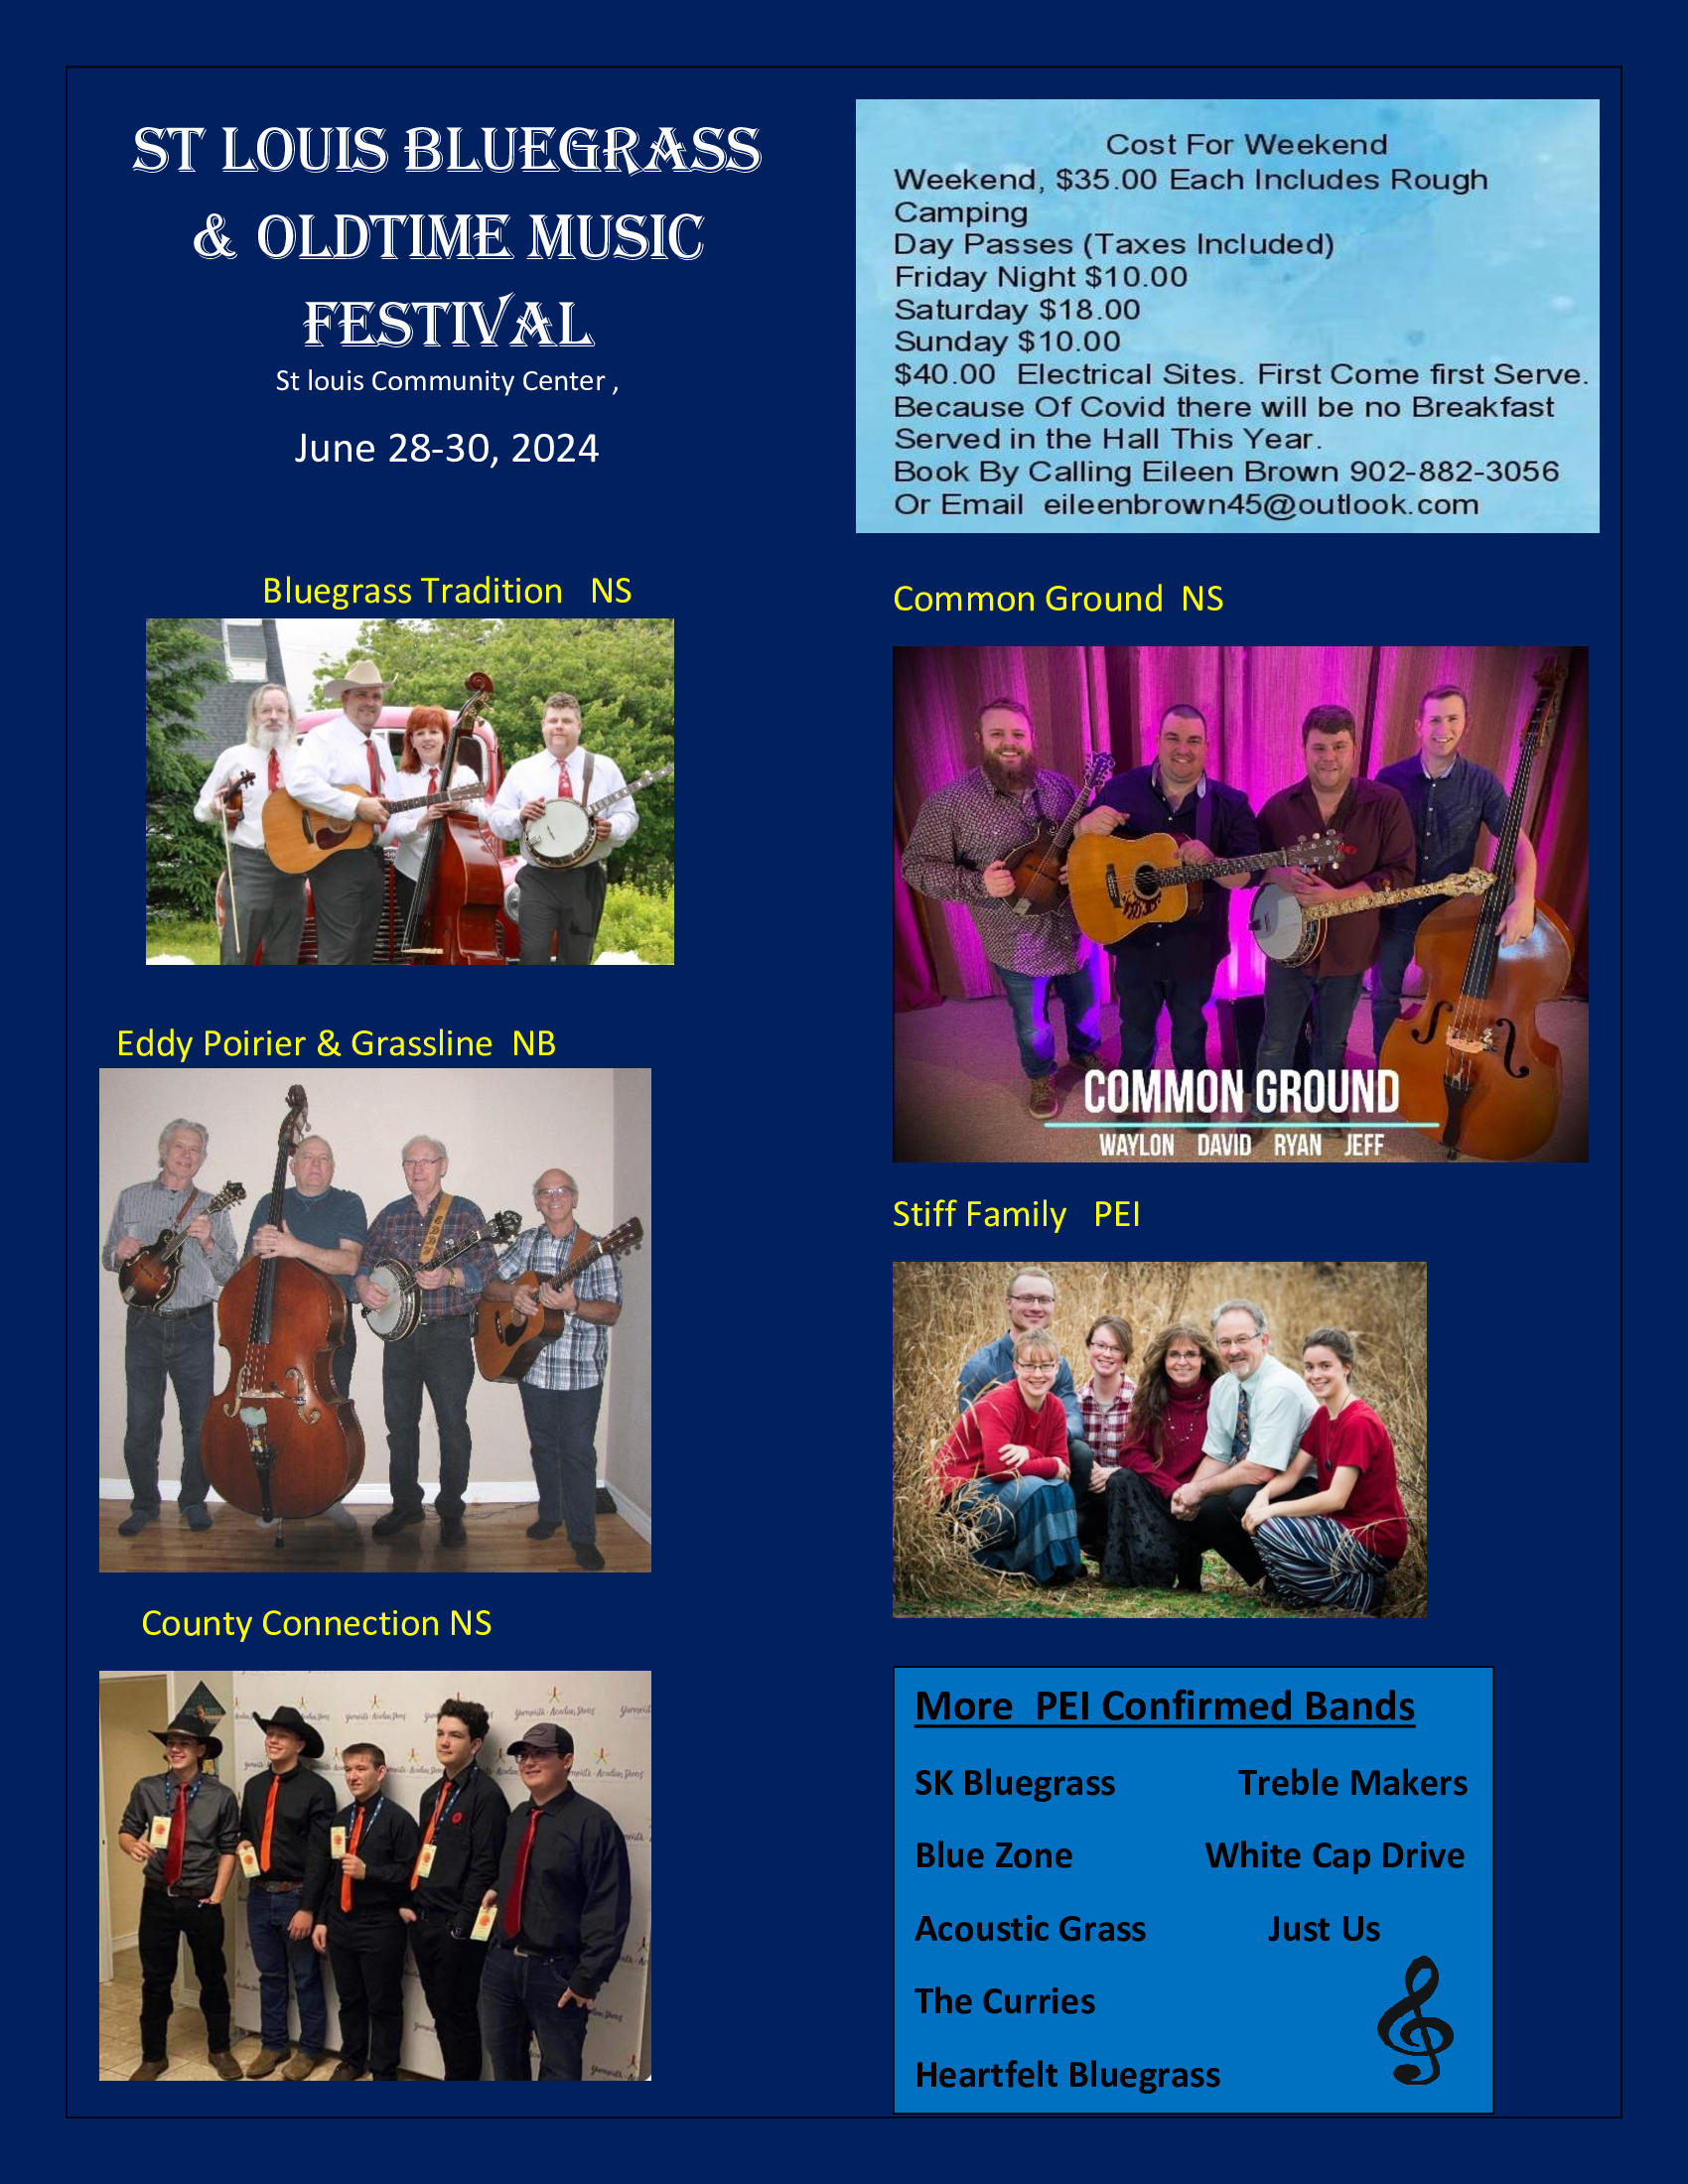 St. Louis Bluegrass and Oldtime Music Festival